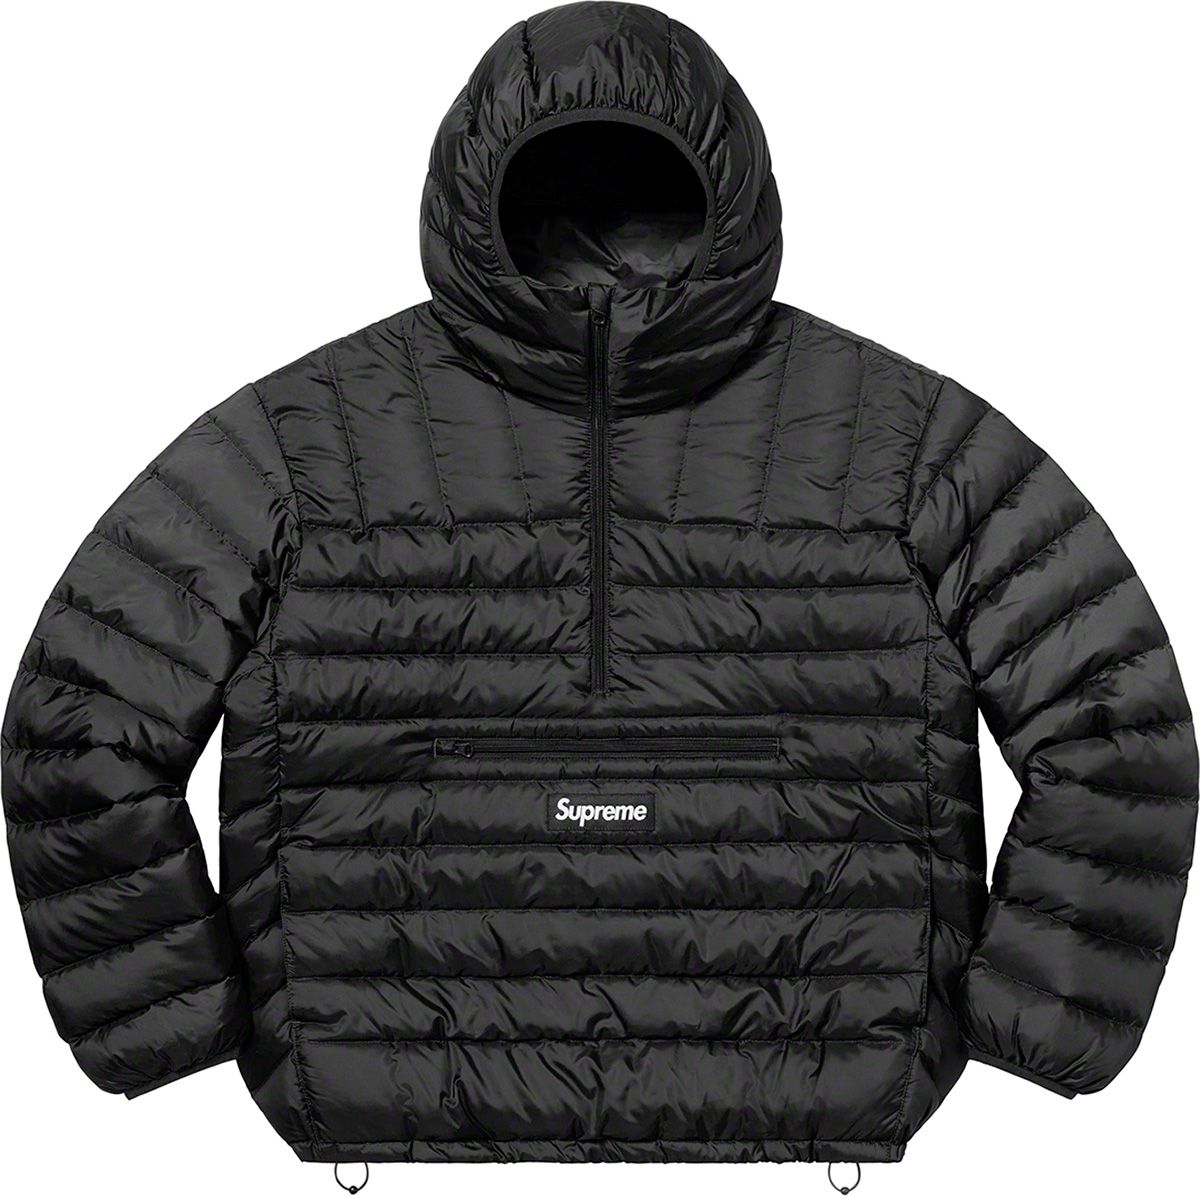 Gonz GORE-TEX Shell Jacket - Fall/Winter 2022 Preview – Supreme